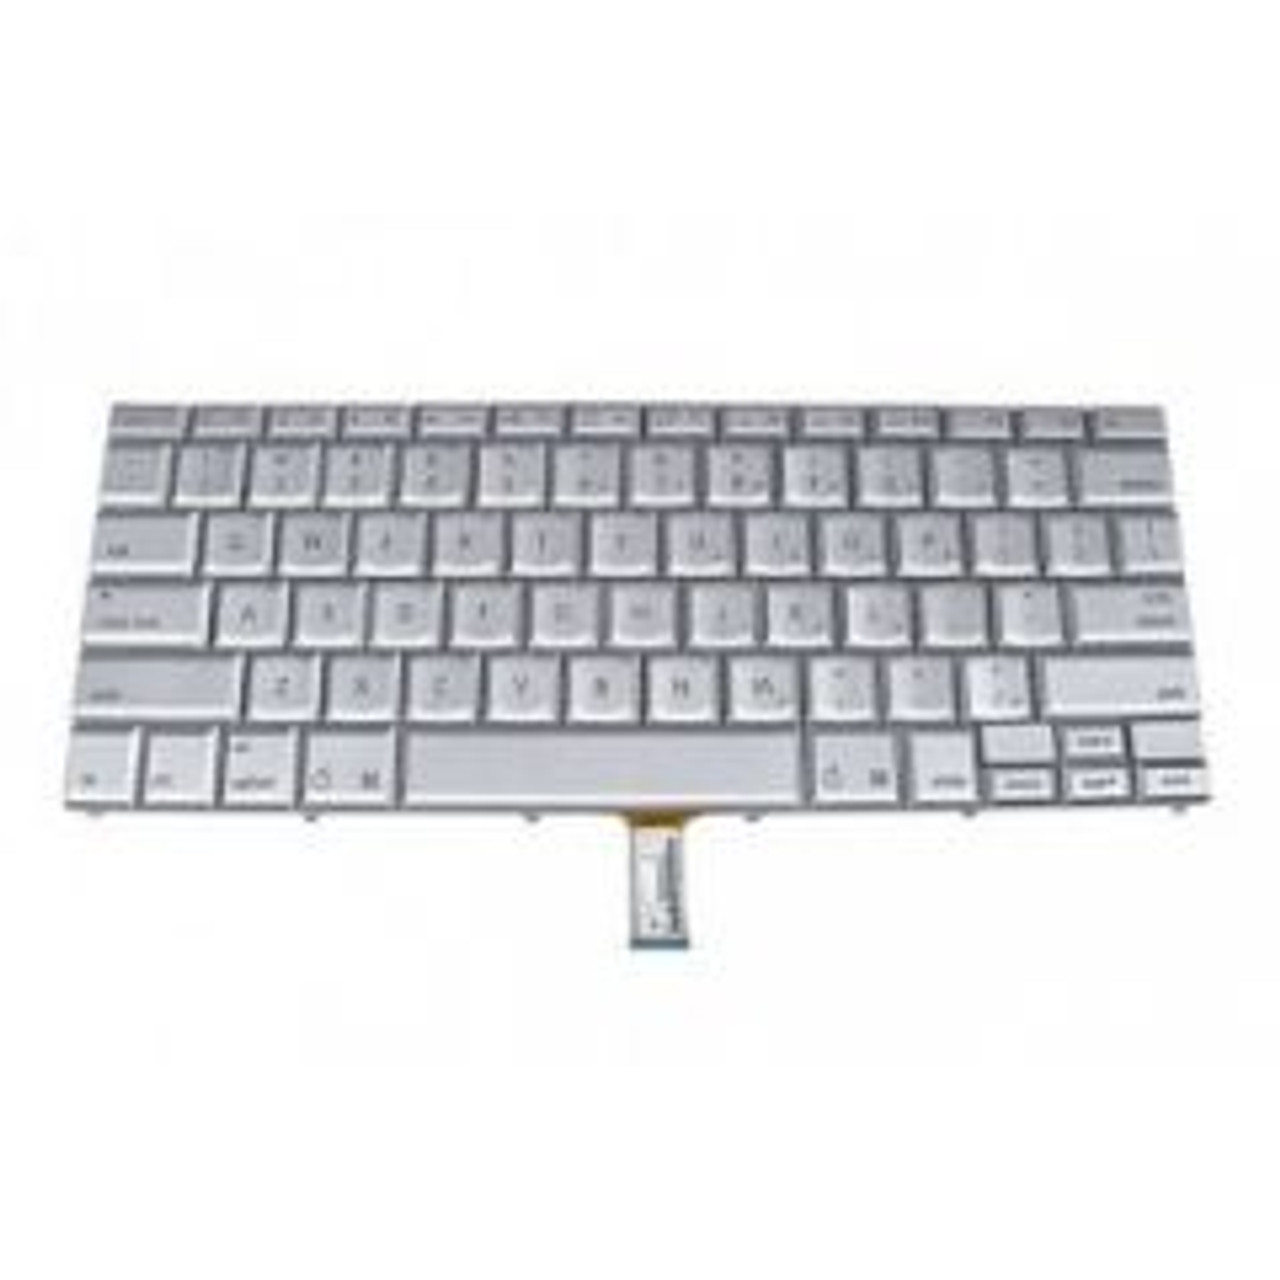 922-8350 | Apple | Keyboard Assembly For Macbook Pro 15